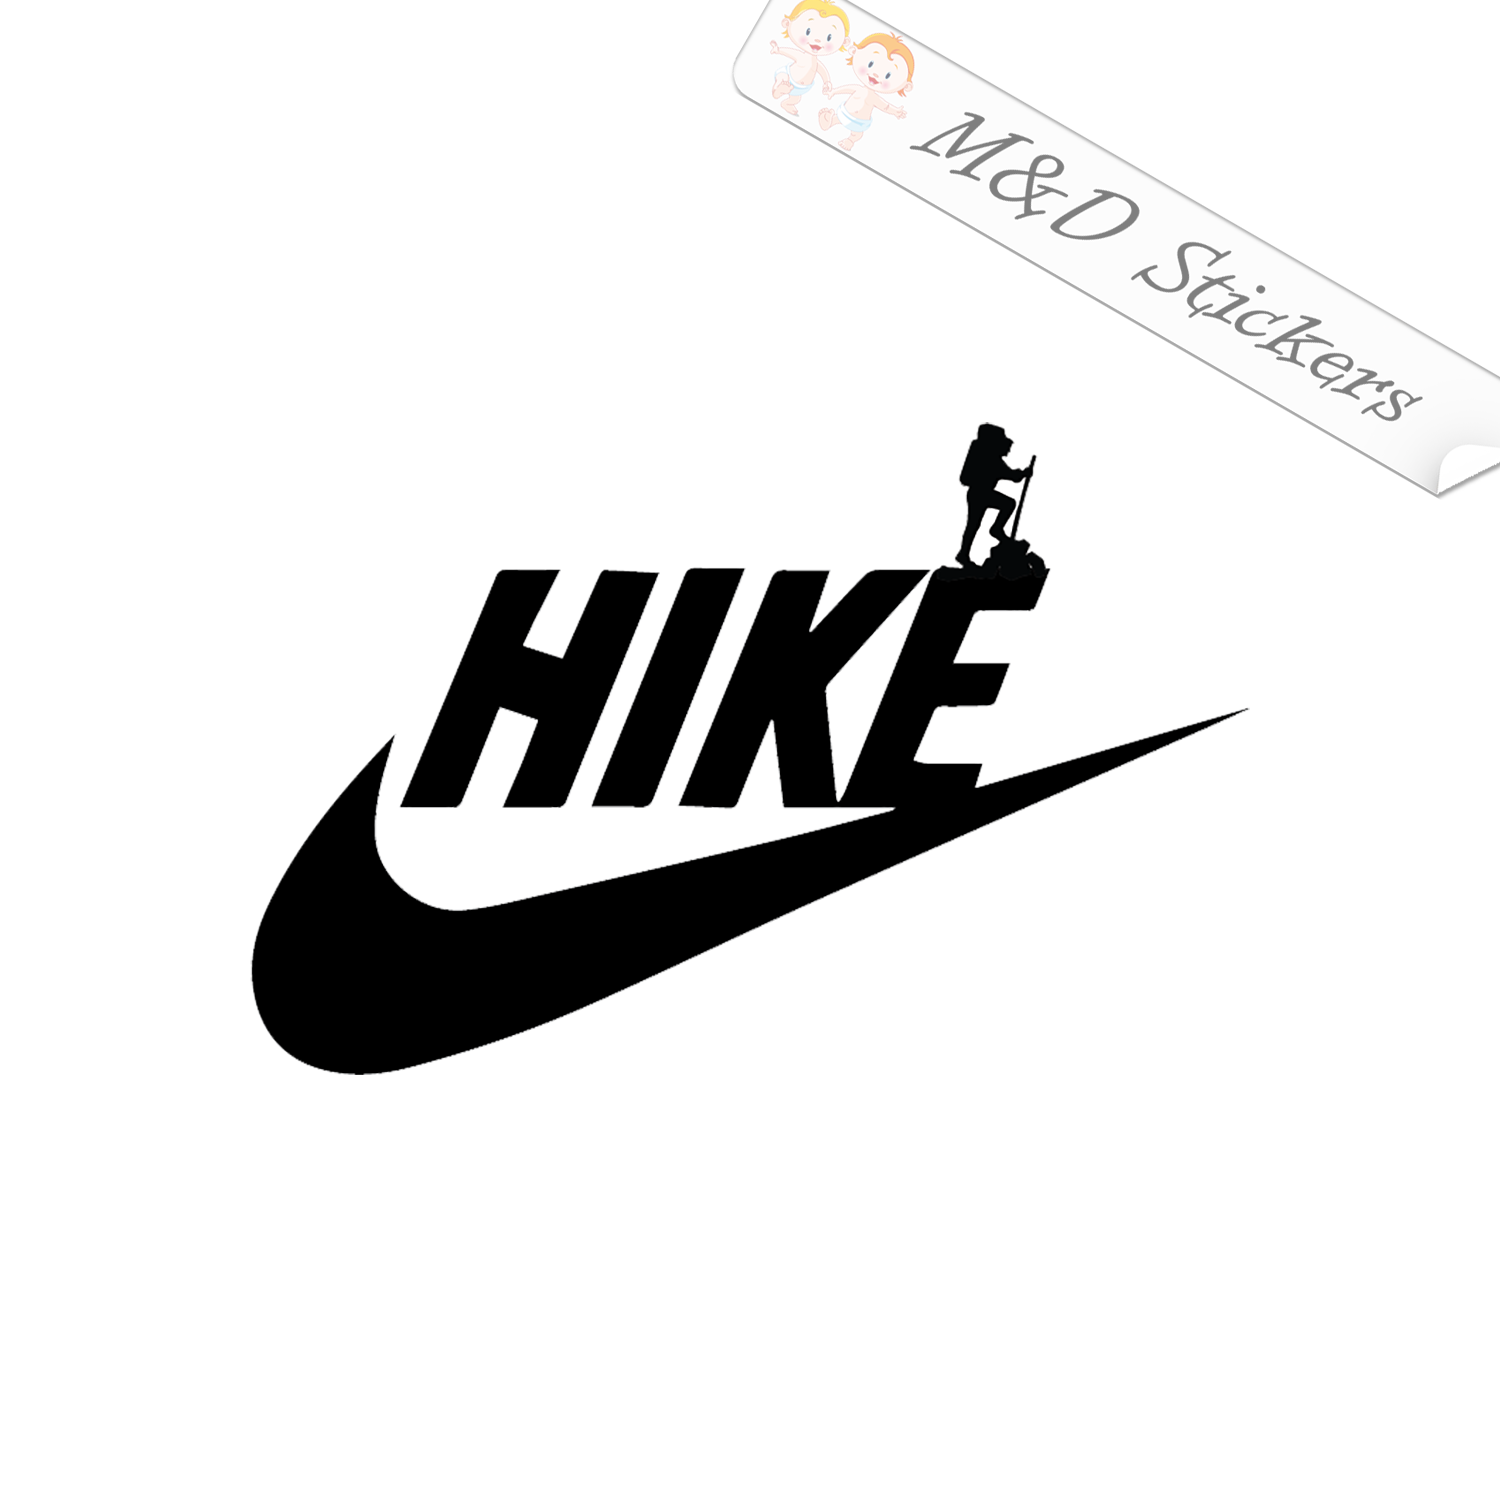 Nike - caricature logo (4.5" - 30") Vinyl in colo M&D Stickers